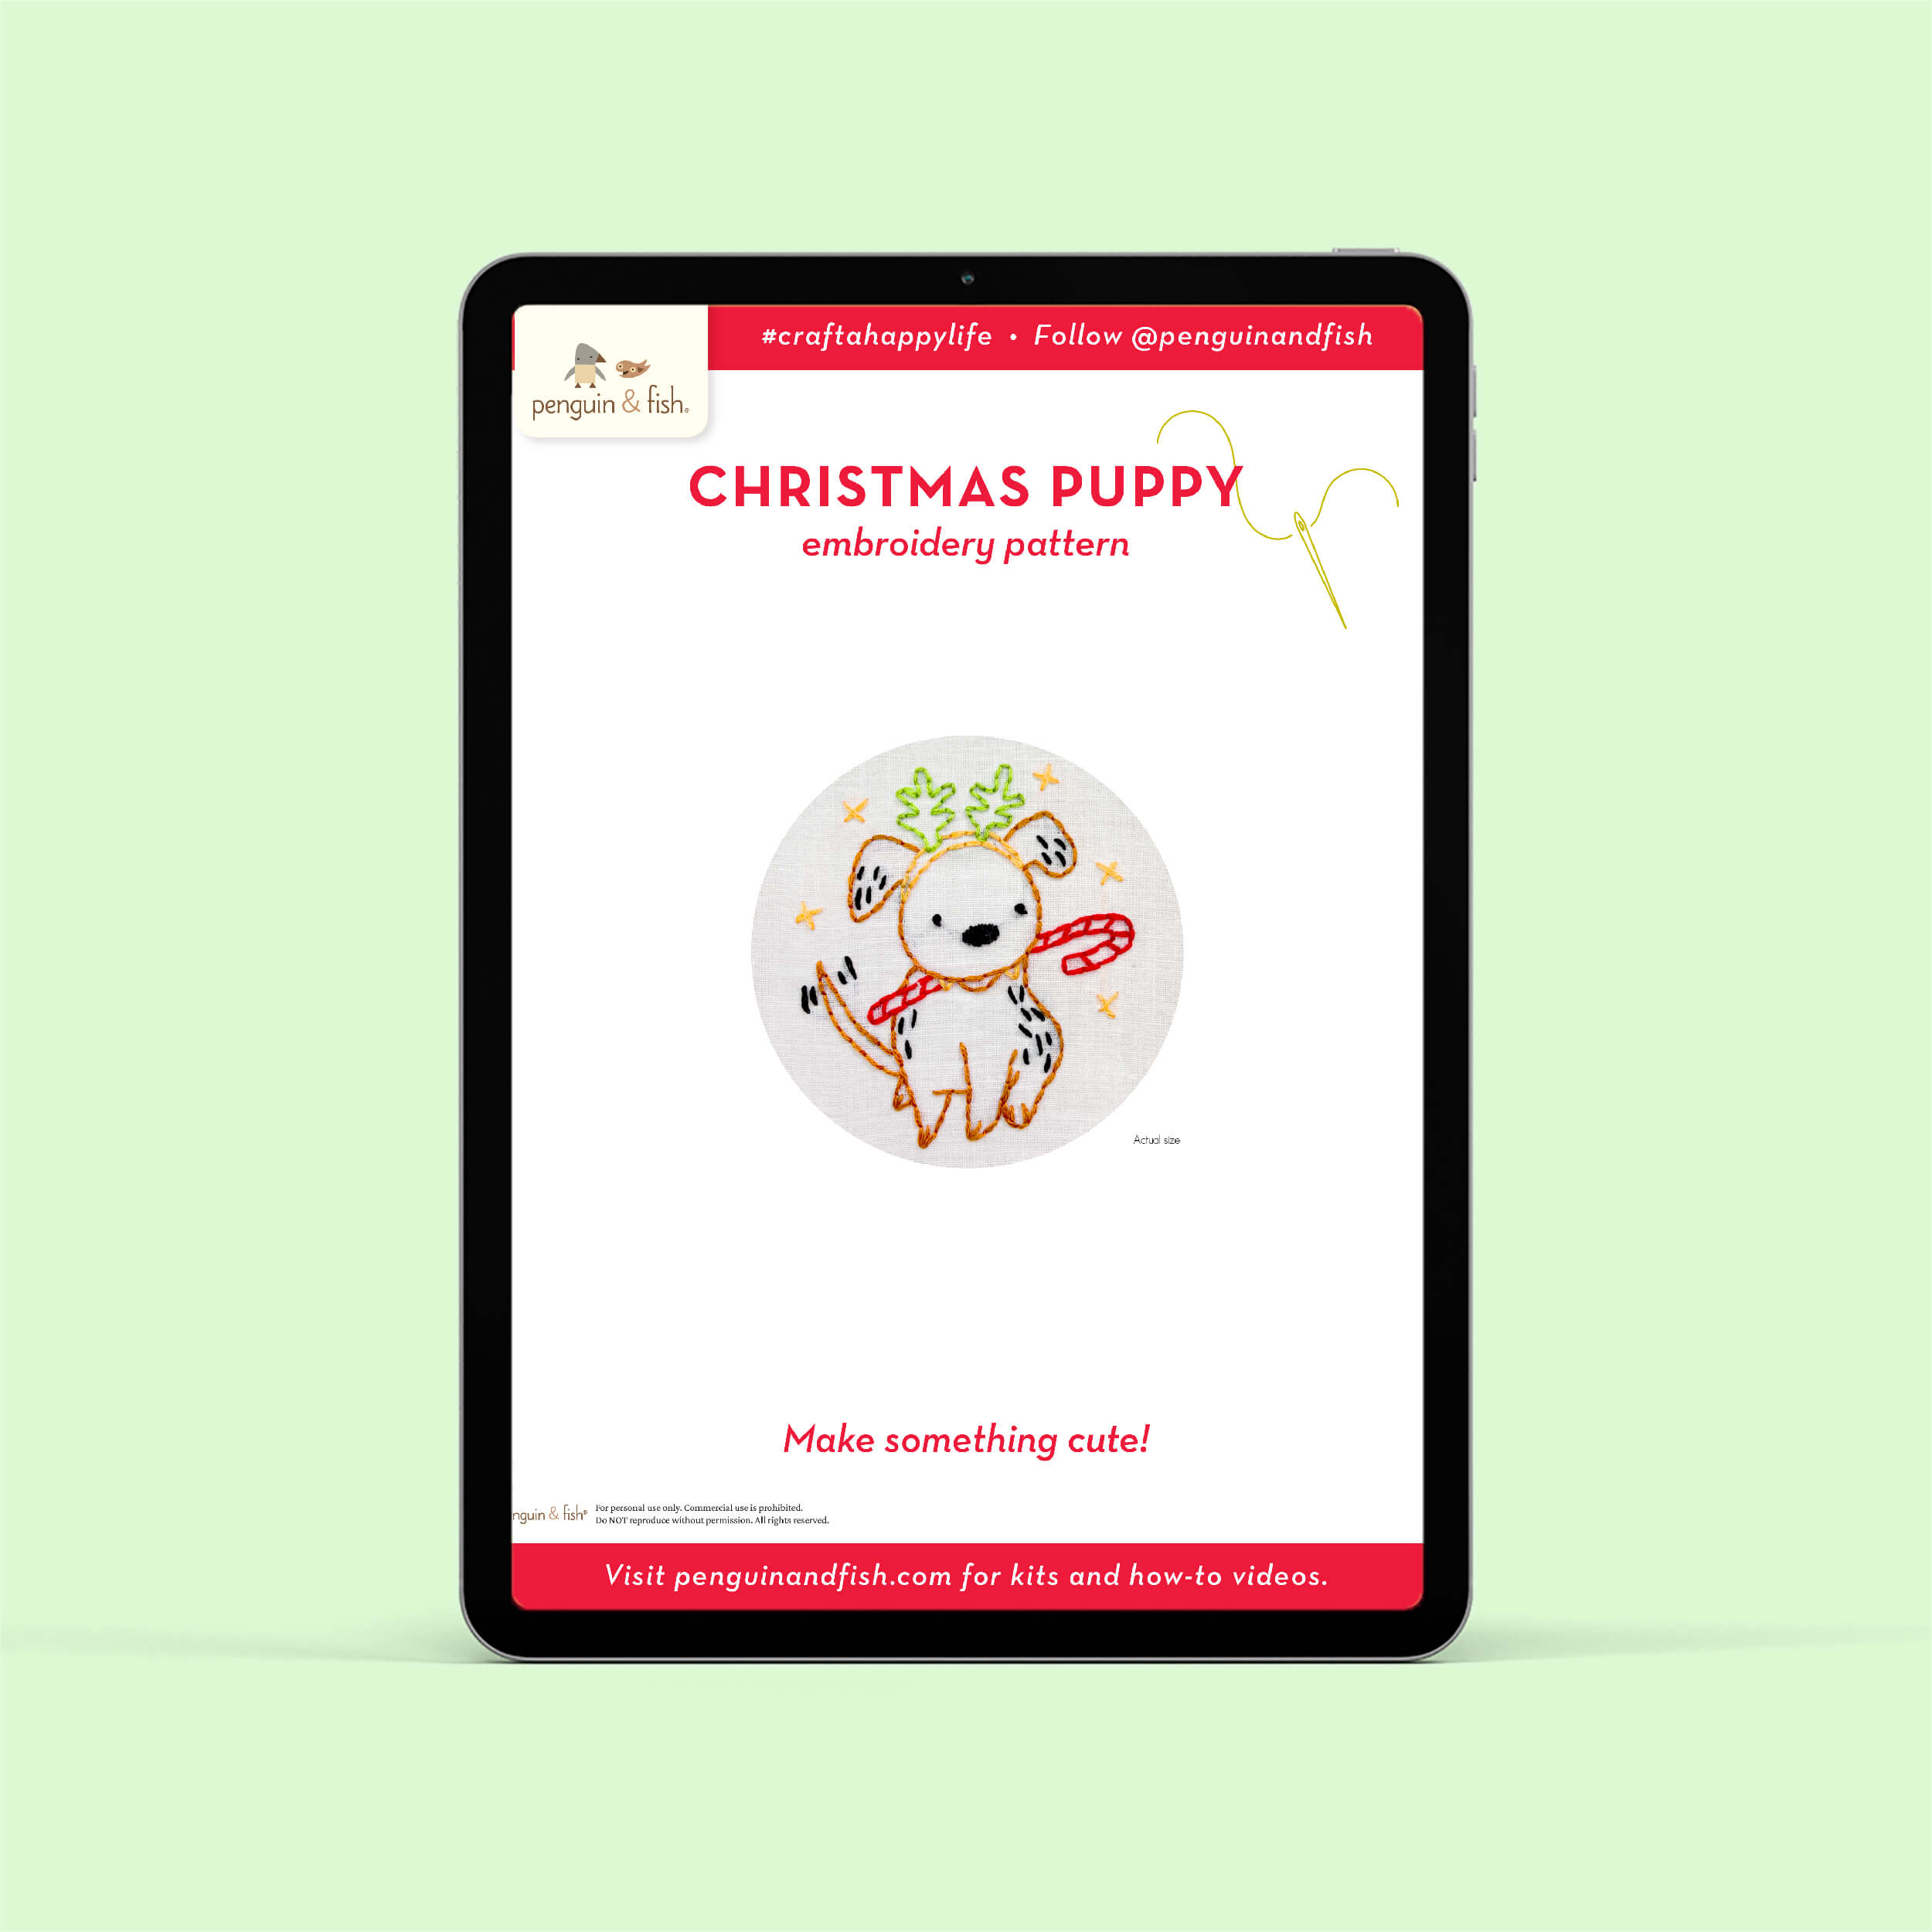 Christmas Puppy PDF embroidery pattern shown on a tablet